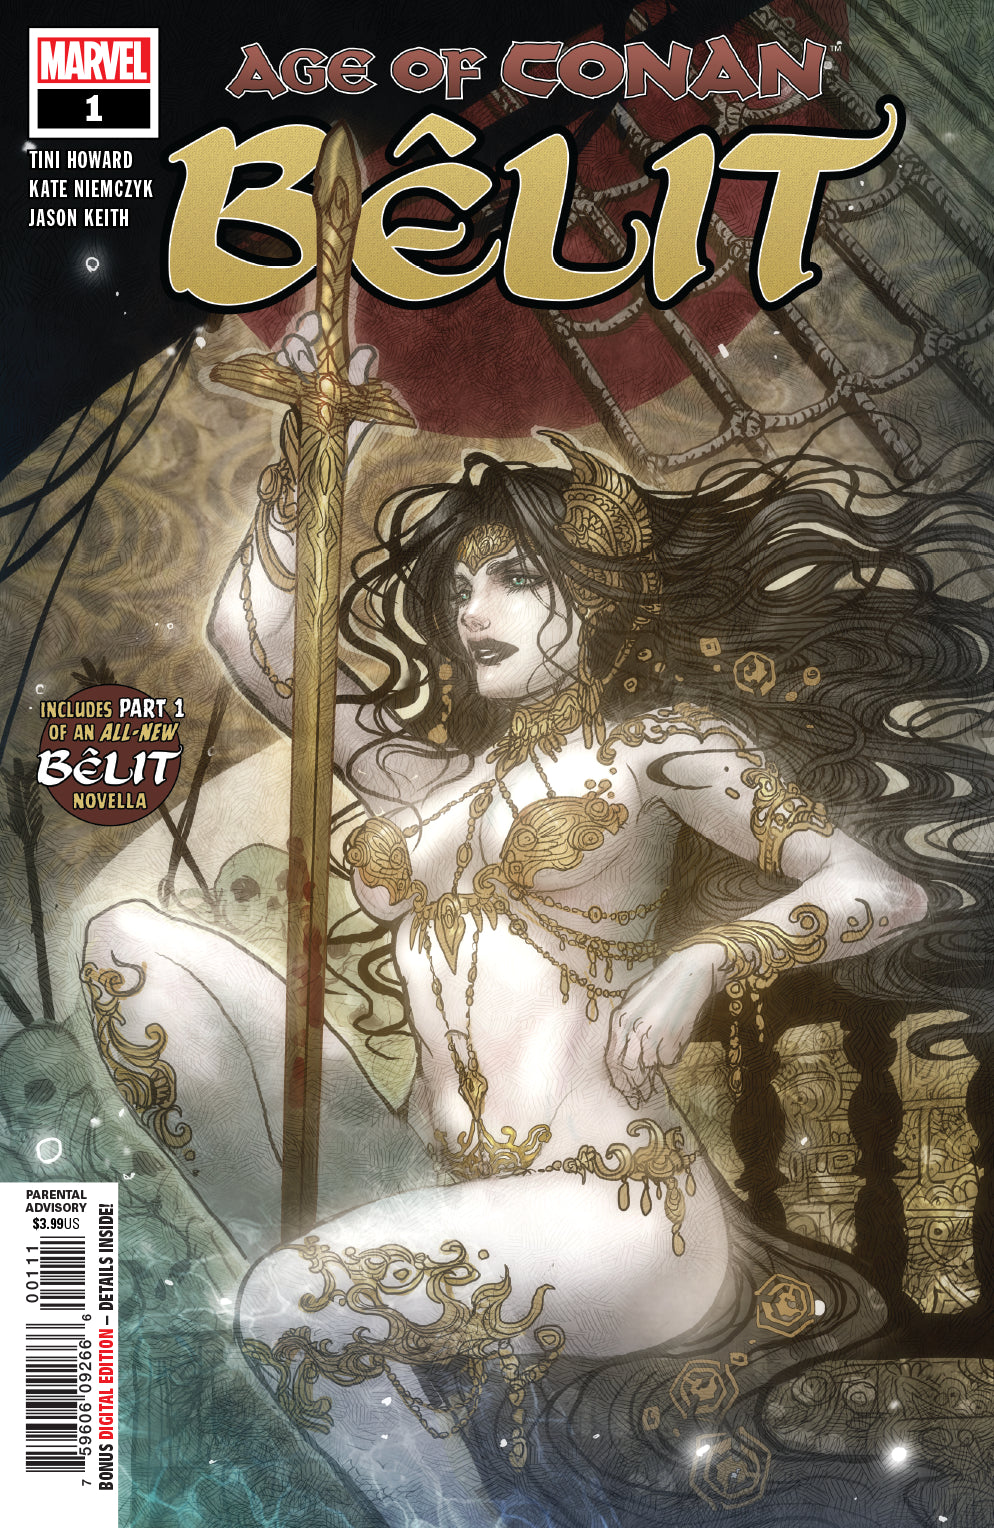 Photo of Age of Conan Belit Issue 1 (Of 5) comic sold by Stronghold Collectibles